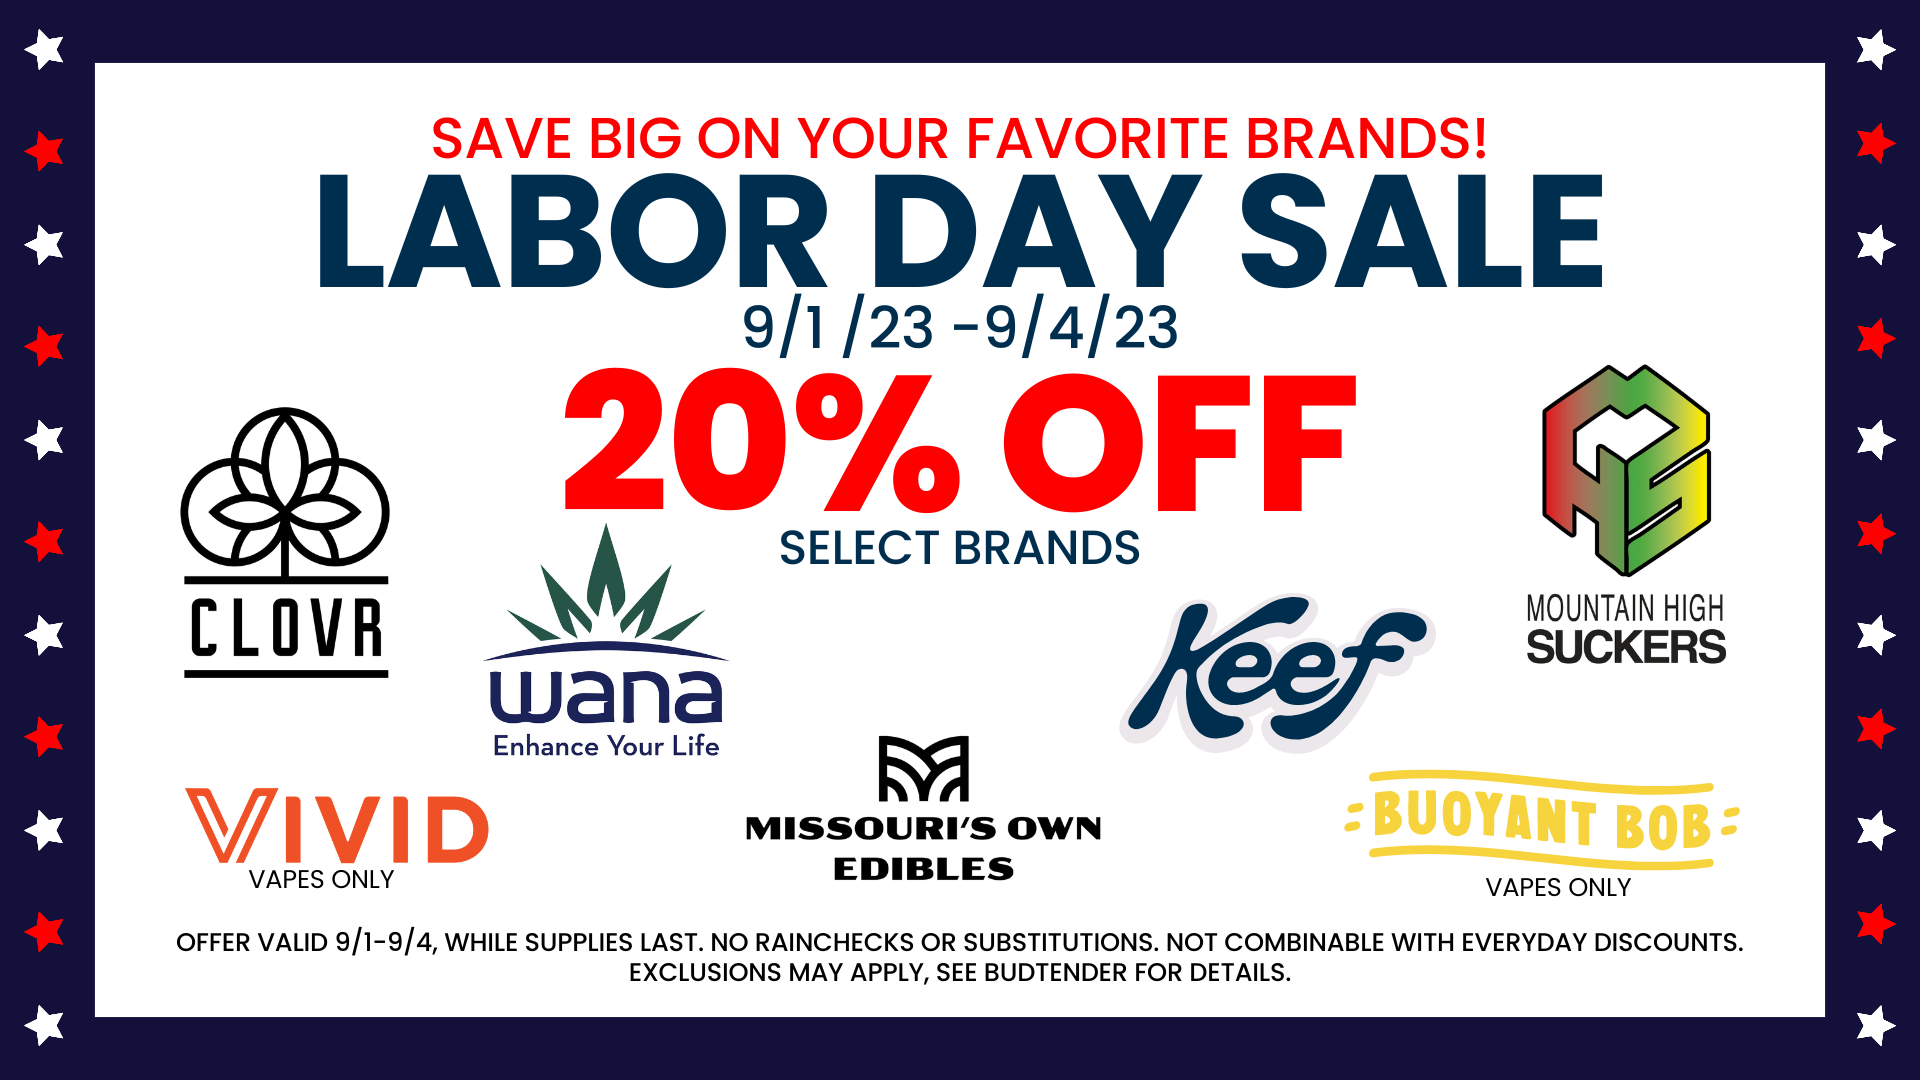 Save with 20% off these brands this Labor Day: CLOVR, Wana, Keef, MHS, Missouri's Own, Buoyant Bob Vapes, Vivid Vapes